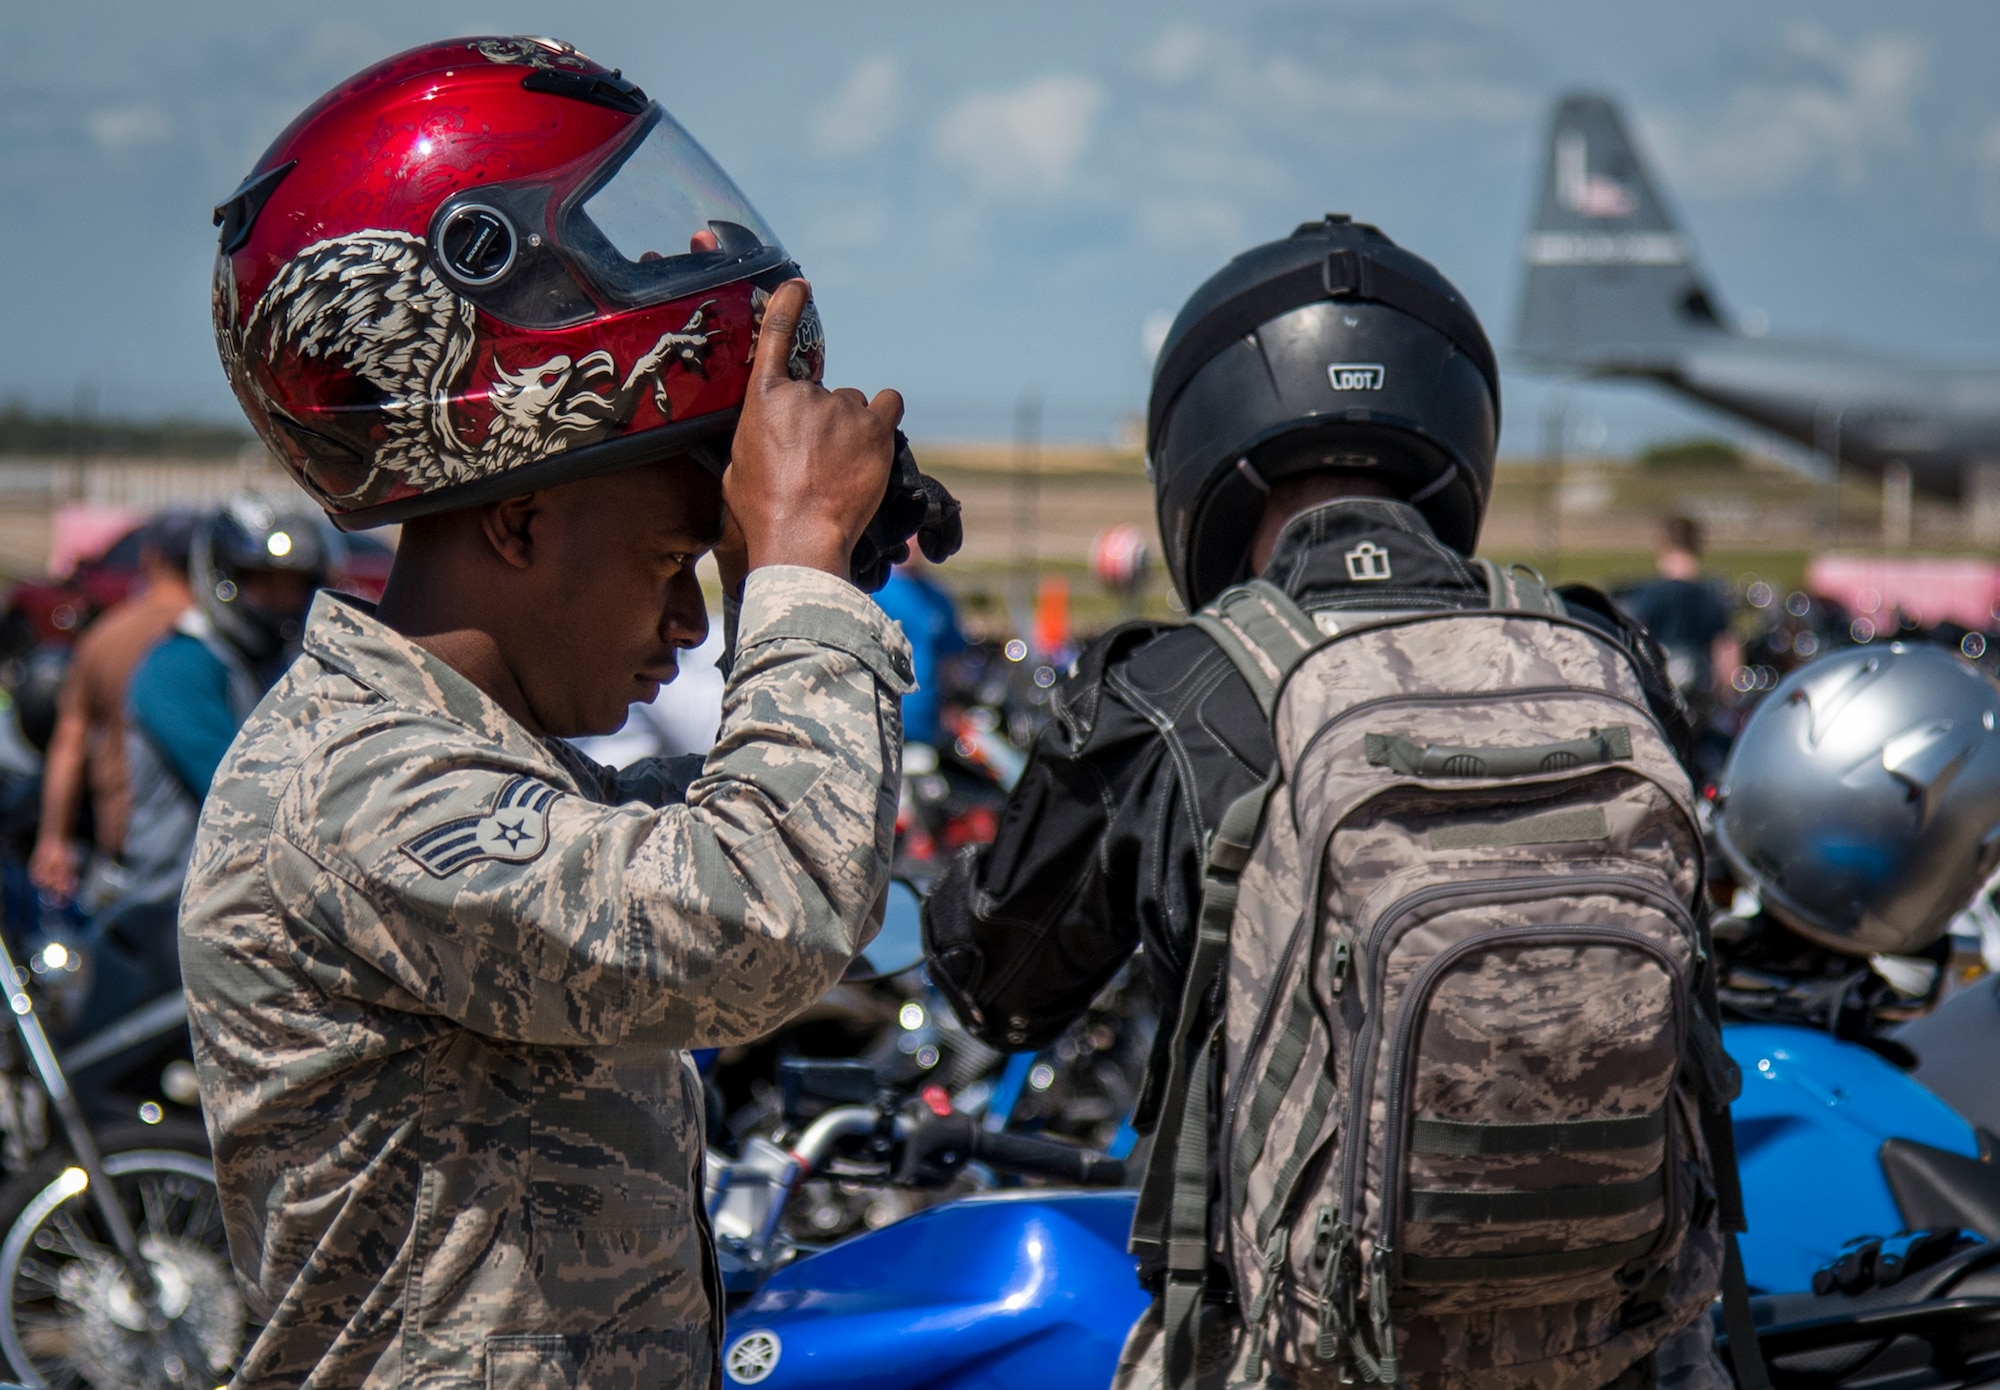 A senior airman puts on his helmet after the annual motorcycle safety rally at Eglin Air Force Base, Fla., April 14.  More than 500 motorcyclists came out for the event that meets the annual safety briefing requirement for base riders.  (U.S. Air Force photo/Samuel King Jr.)